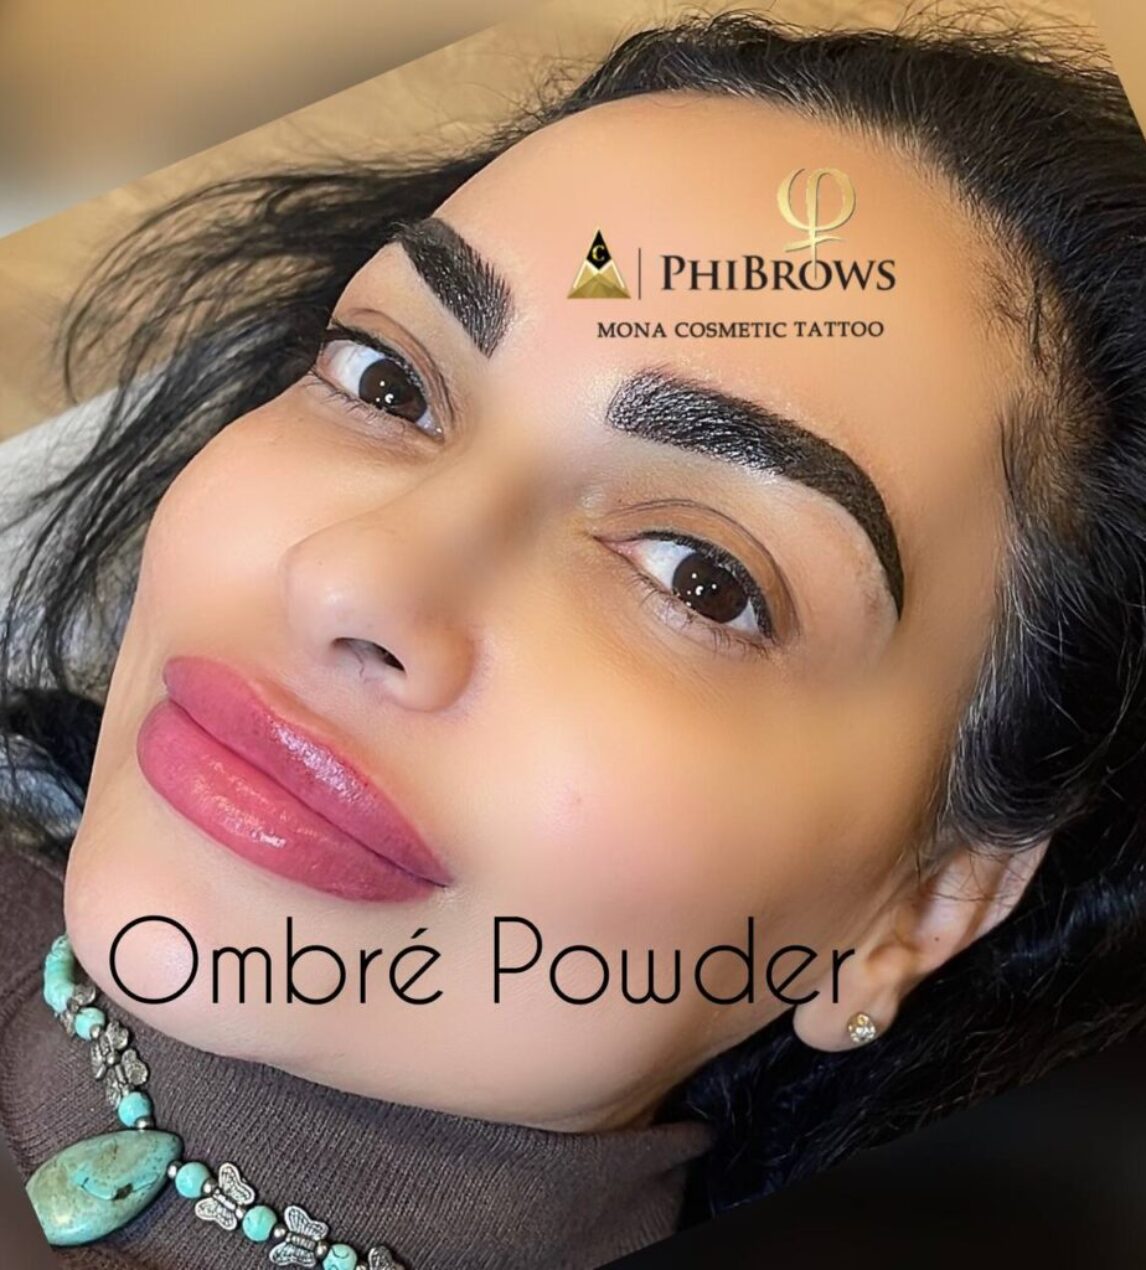   Ombre Powder   High Definition Brows The brow fairies at lds understand that every set of eyebrows has their own history and long term brow goals. During CosmeticTatto BrowDesign we spend 15mins mapping your new look for your very own exquisite bespoke brows. Your brow stylist will fill in areas of sparsity, addressing areas of regrowth and advising on the best products for individual brow needs.